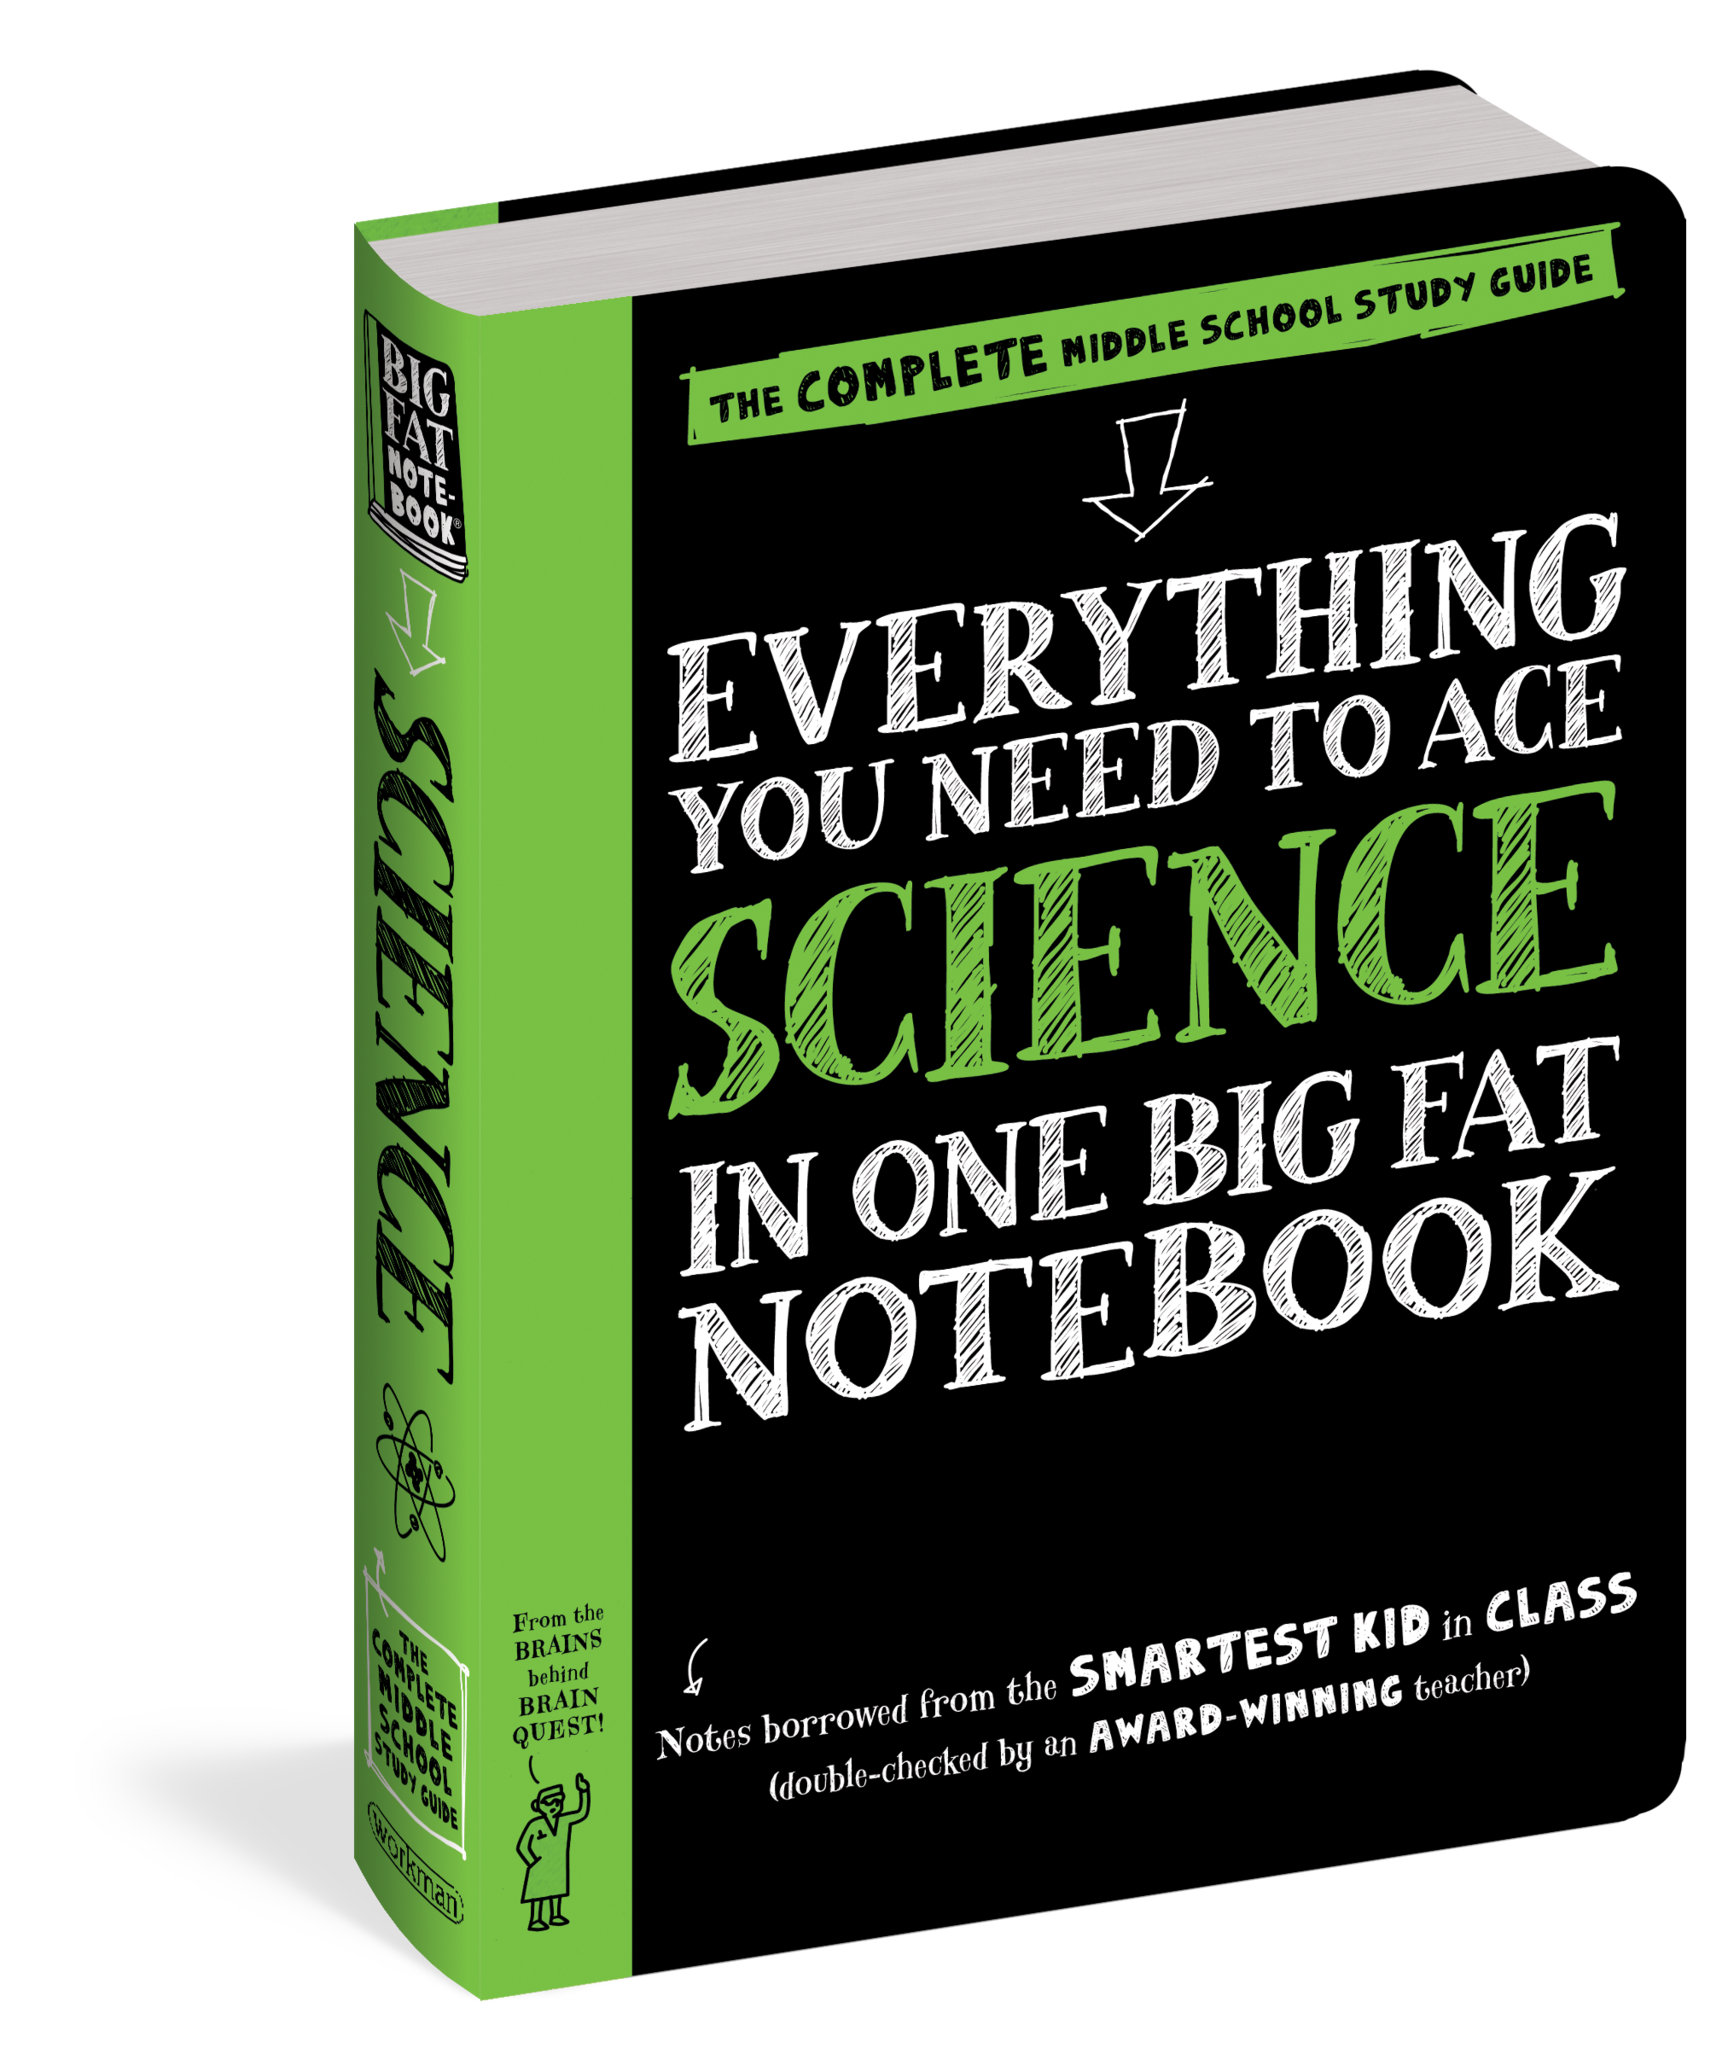 EVERYTHING SCIENCE NOTEBOOK PB BRAINQUEST@